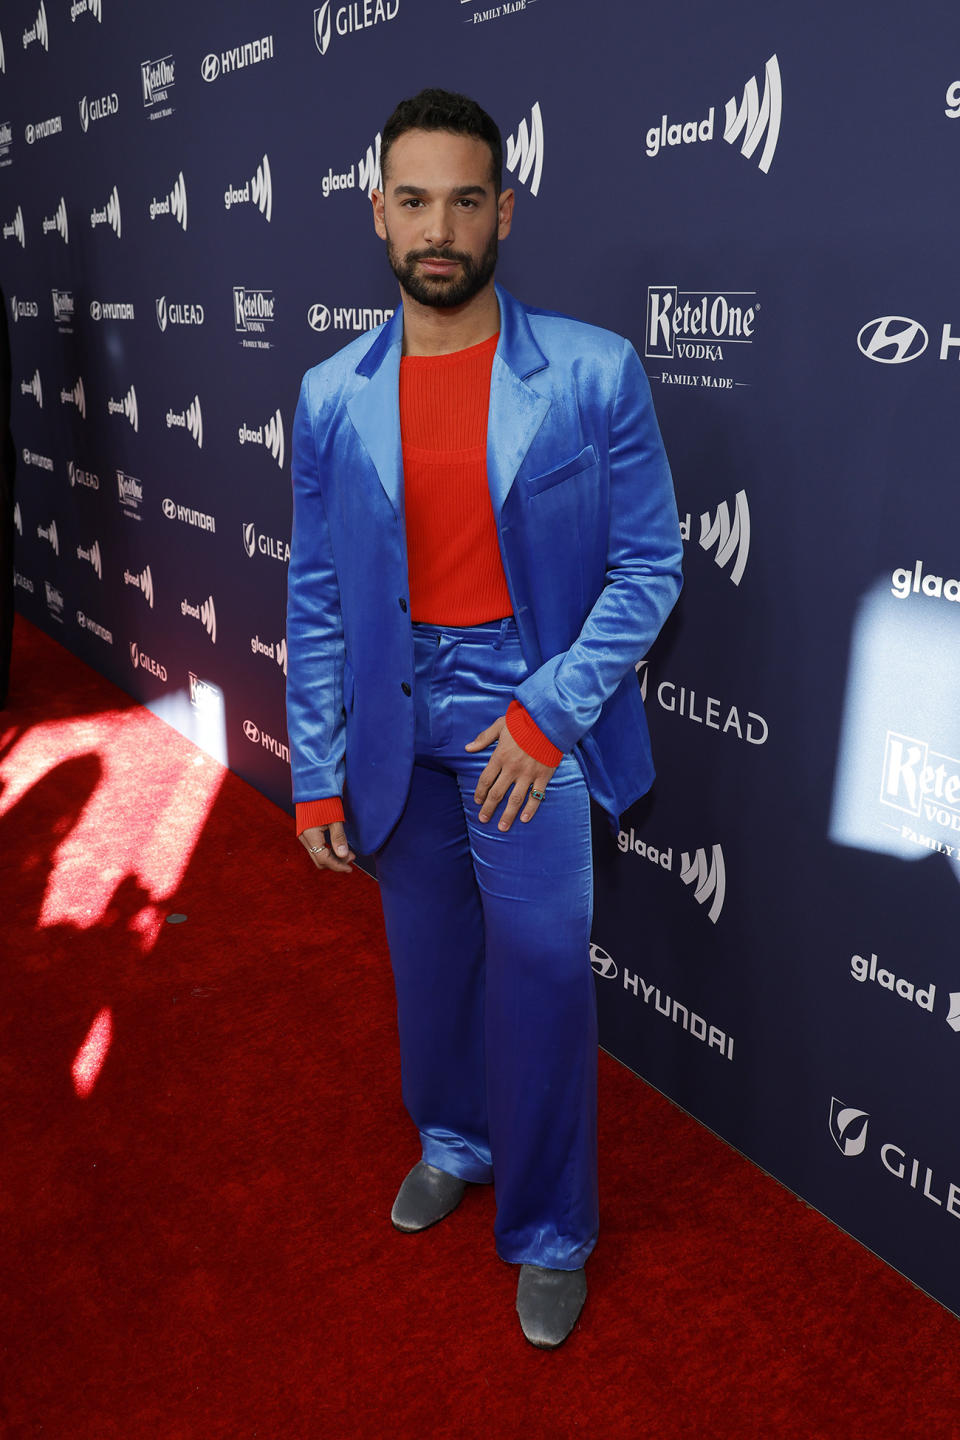 <p>BEVERLY HILLS, CALIFORNIA – MARCH 30: Johnny Sibilly attends the GLAAD Media Awards at The Beverly Hilton on March 30, 2023 in Beverly Hills, California. (Photo by Frazer Harrison/Getty Images for GLAAD)</p>